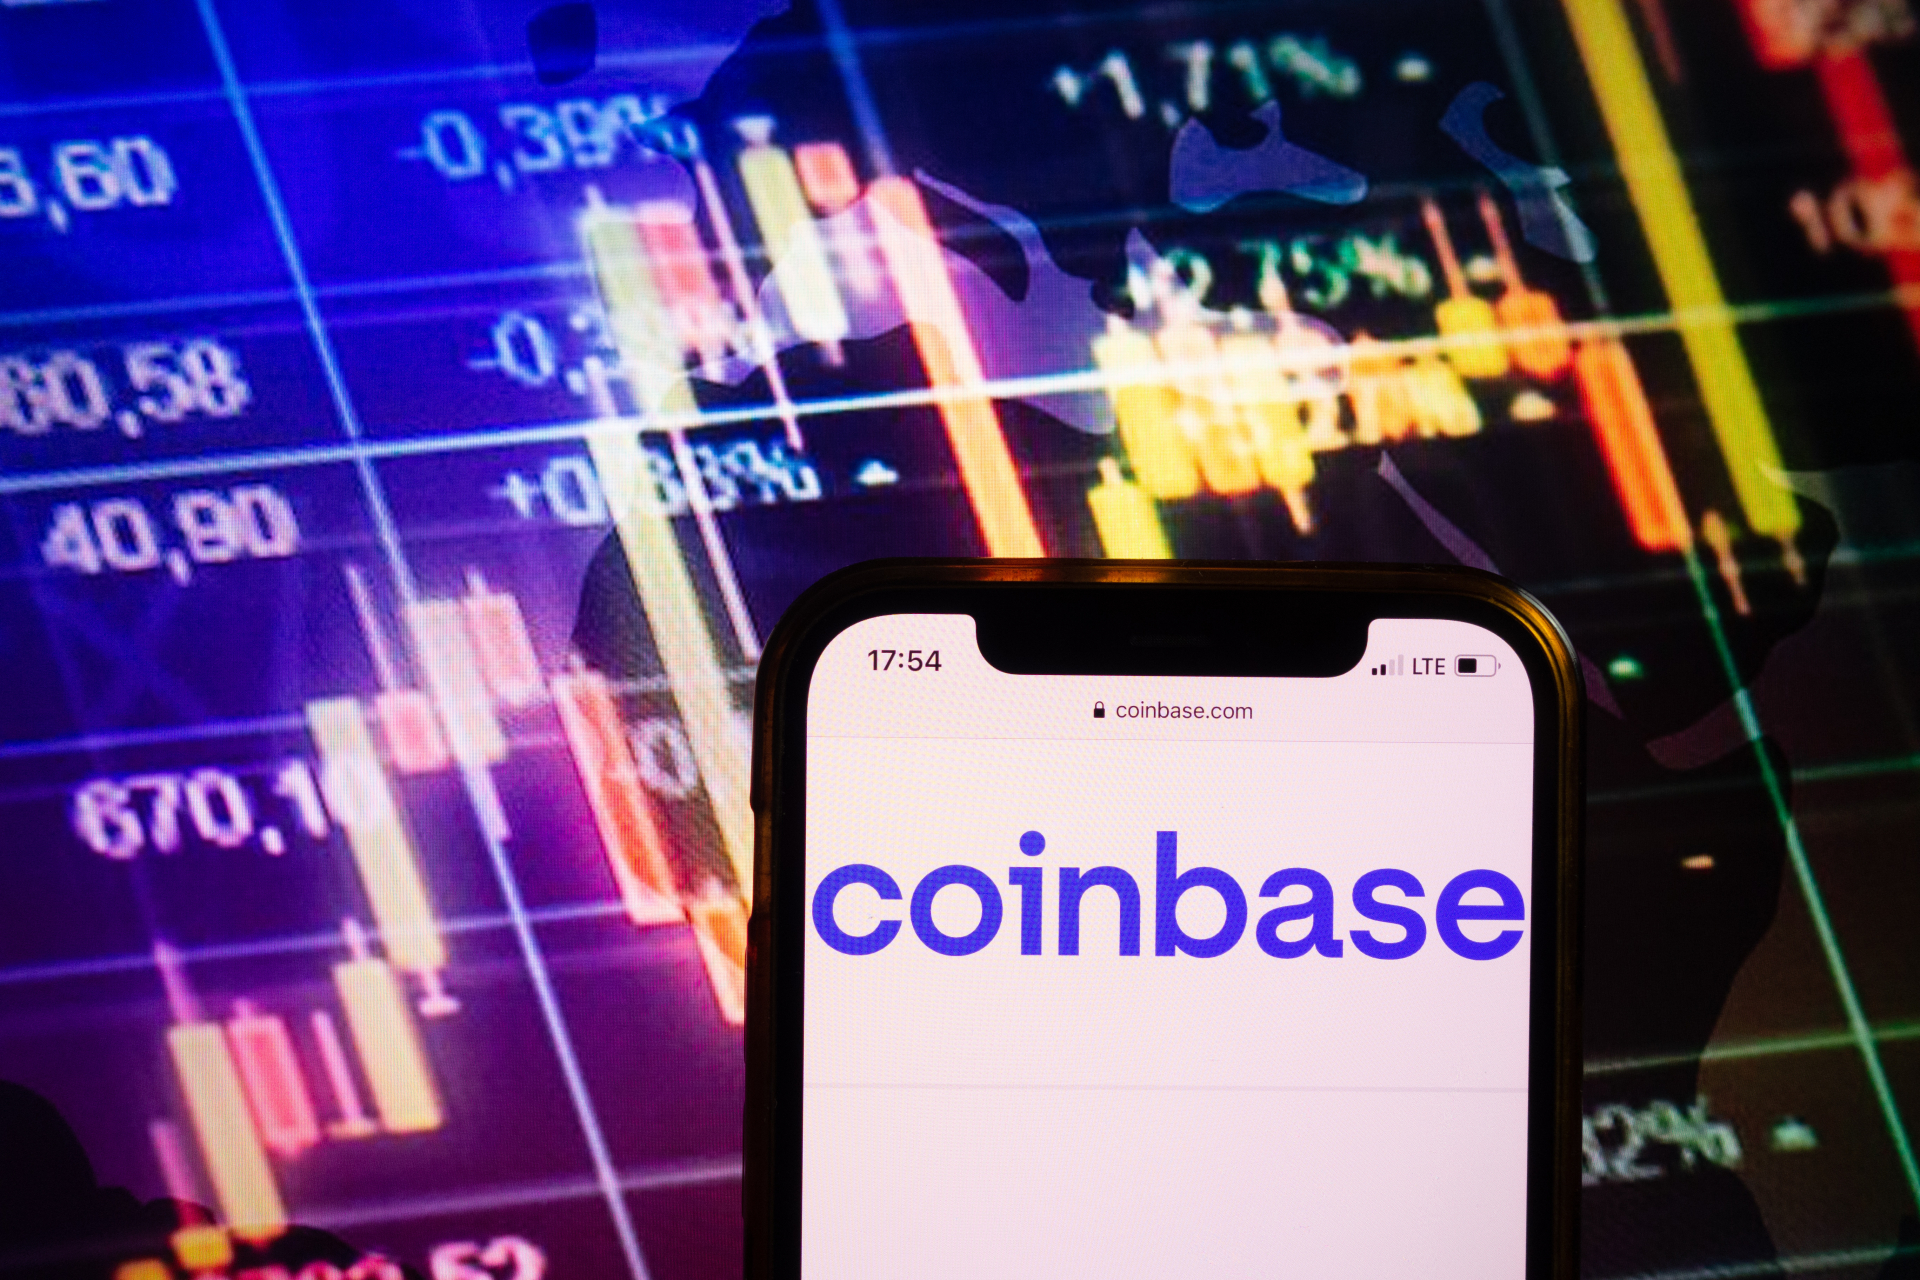 Ark Invest raised nearly $16 million in Coinbase shares in February
